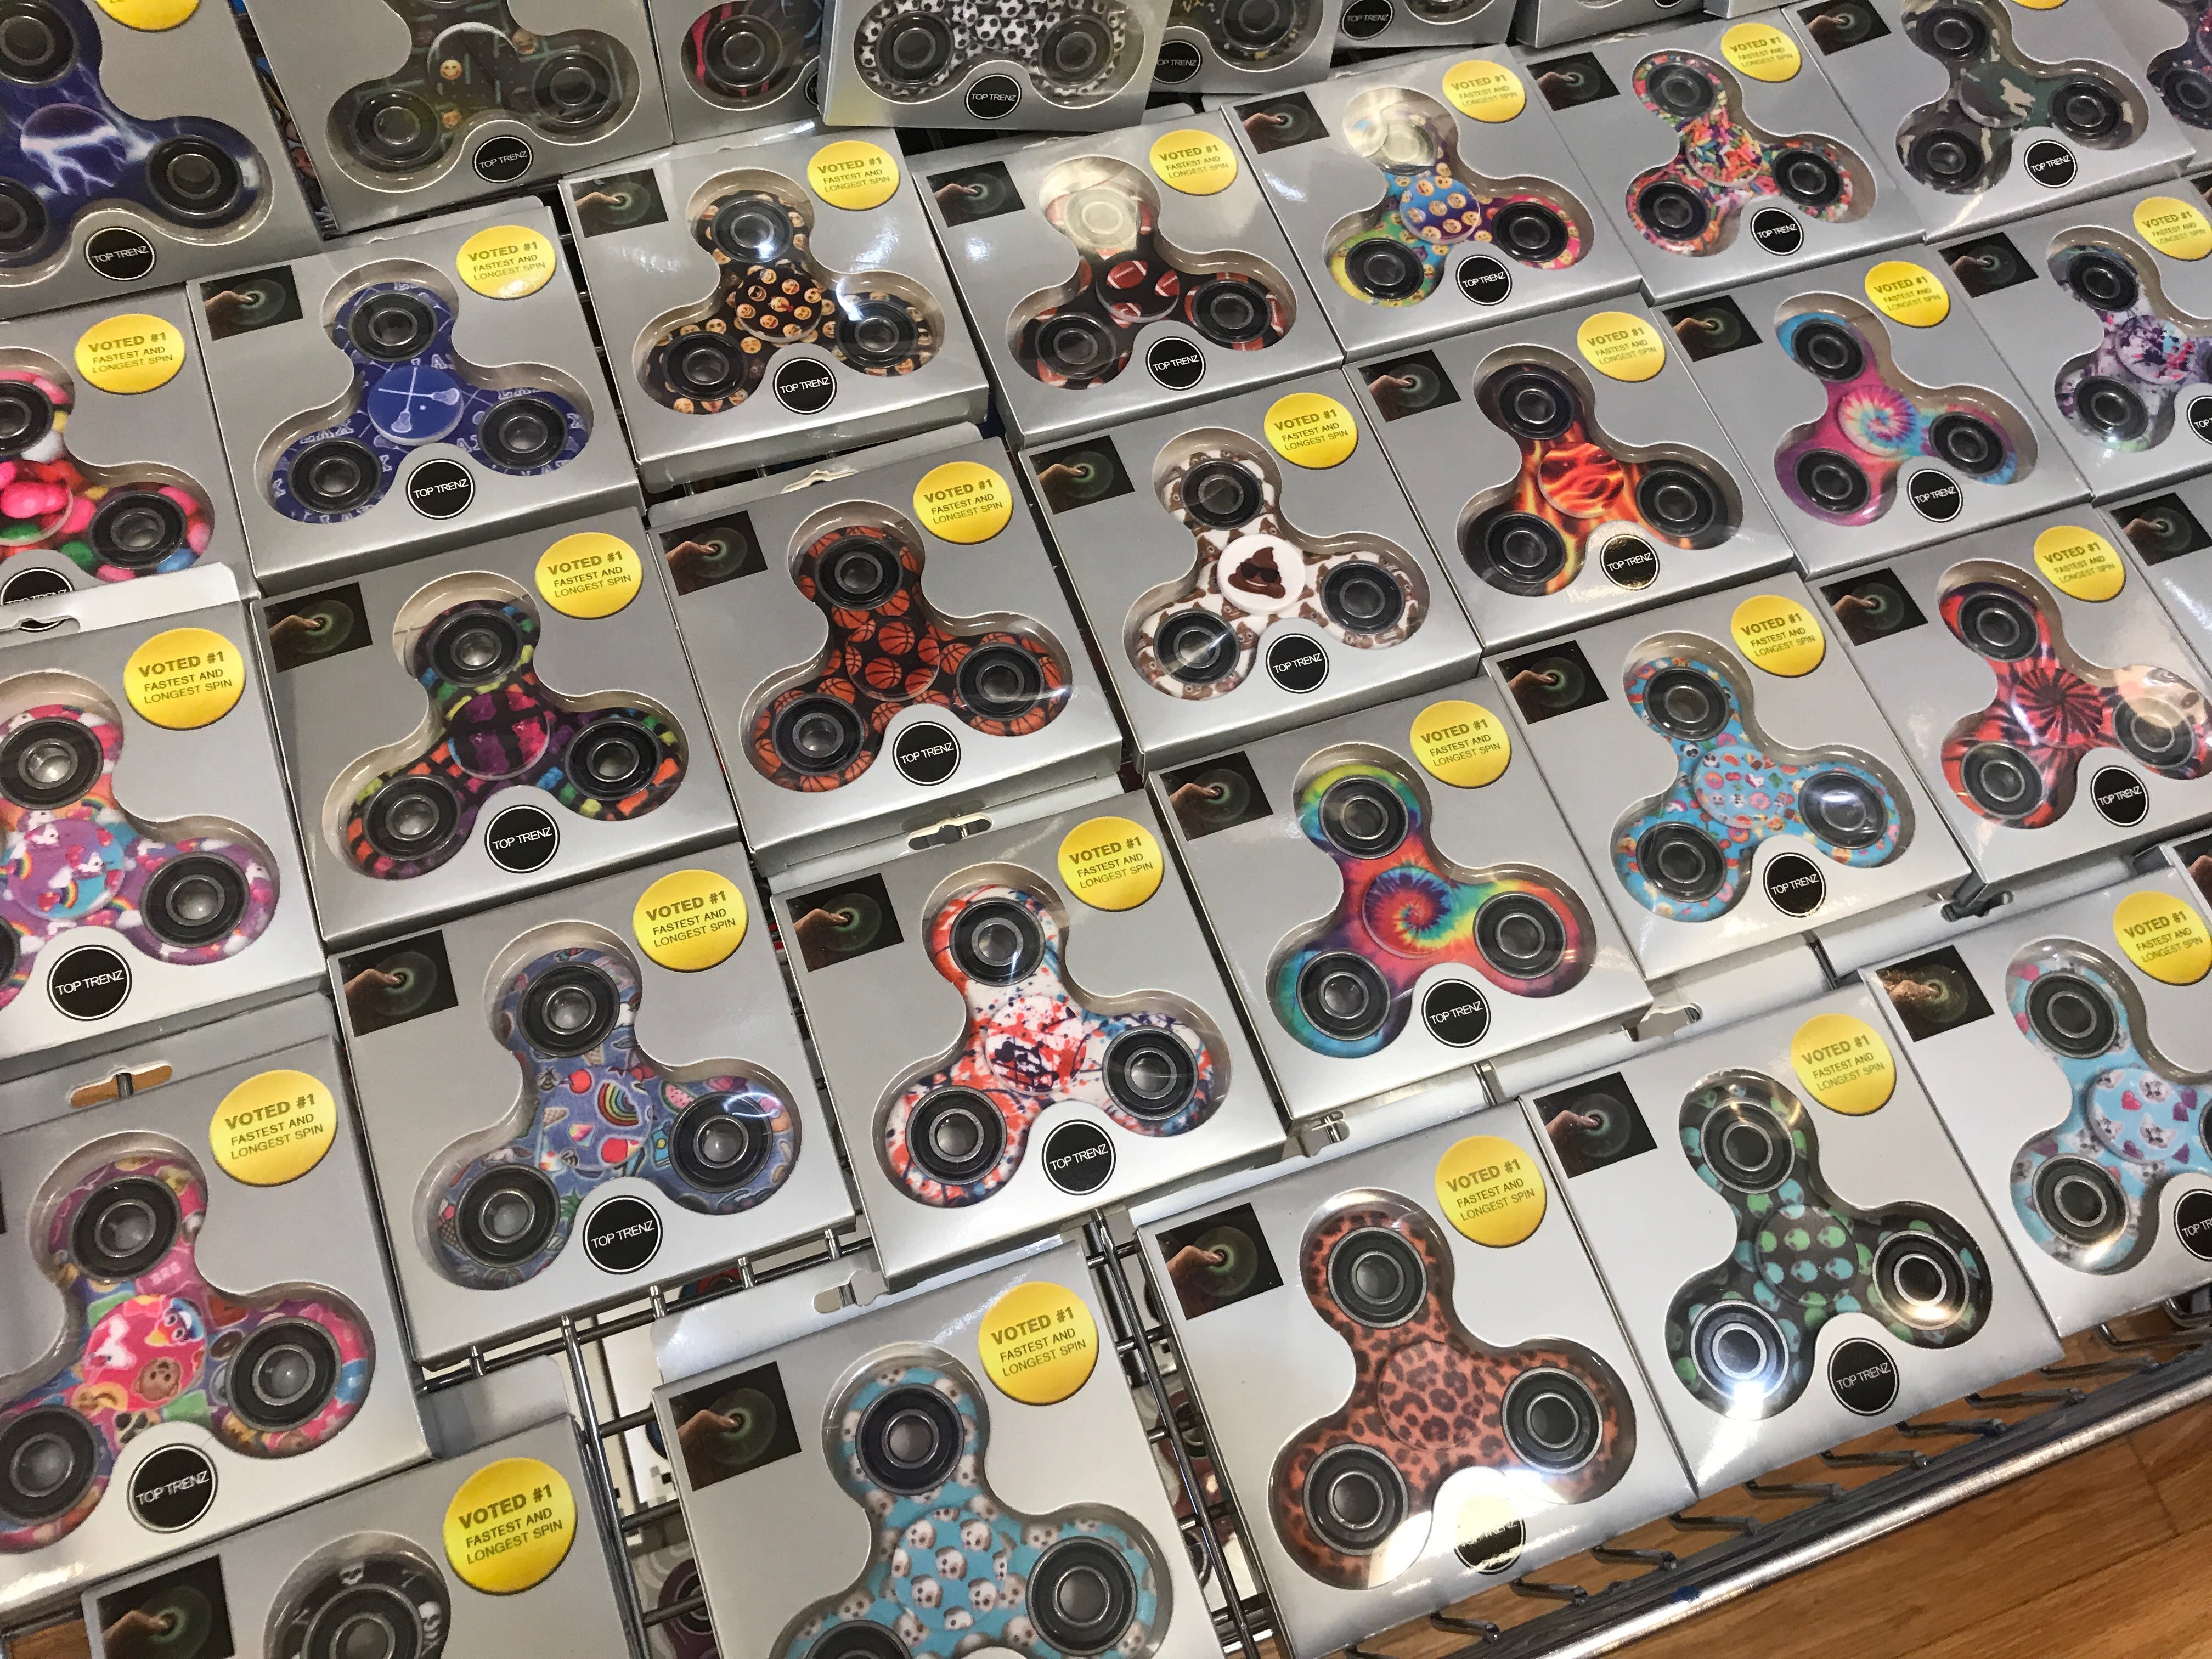 What's the fidget spinners craze all about?